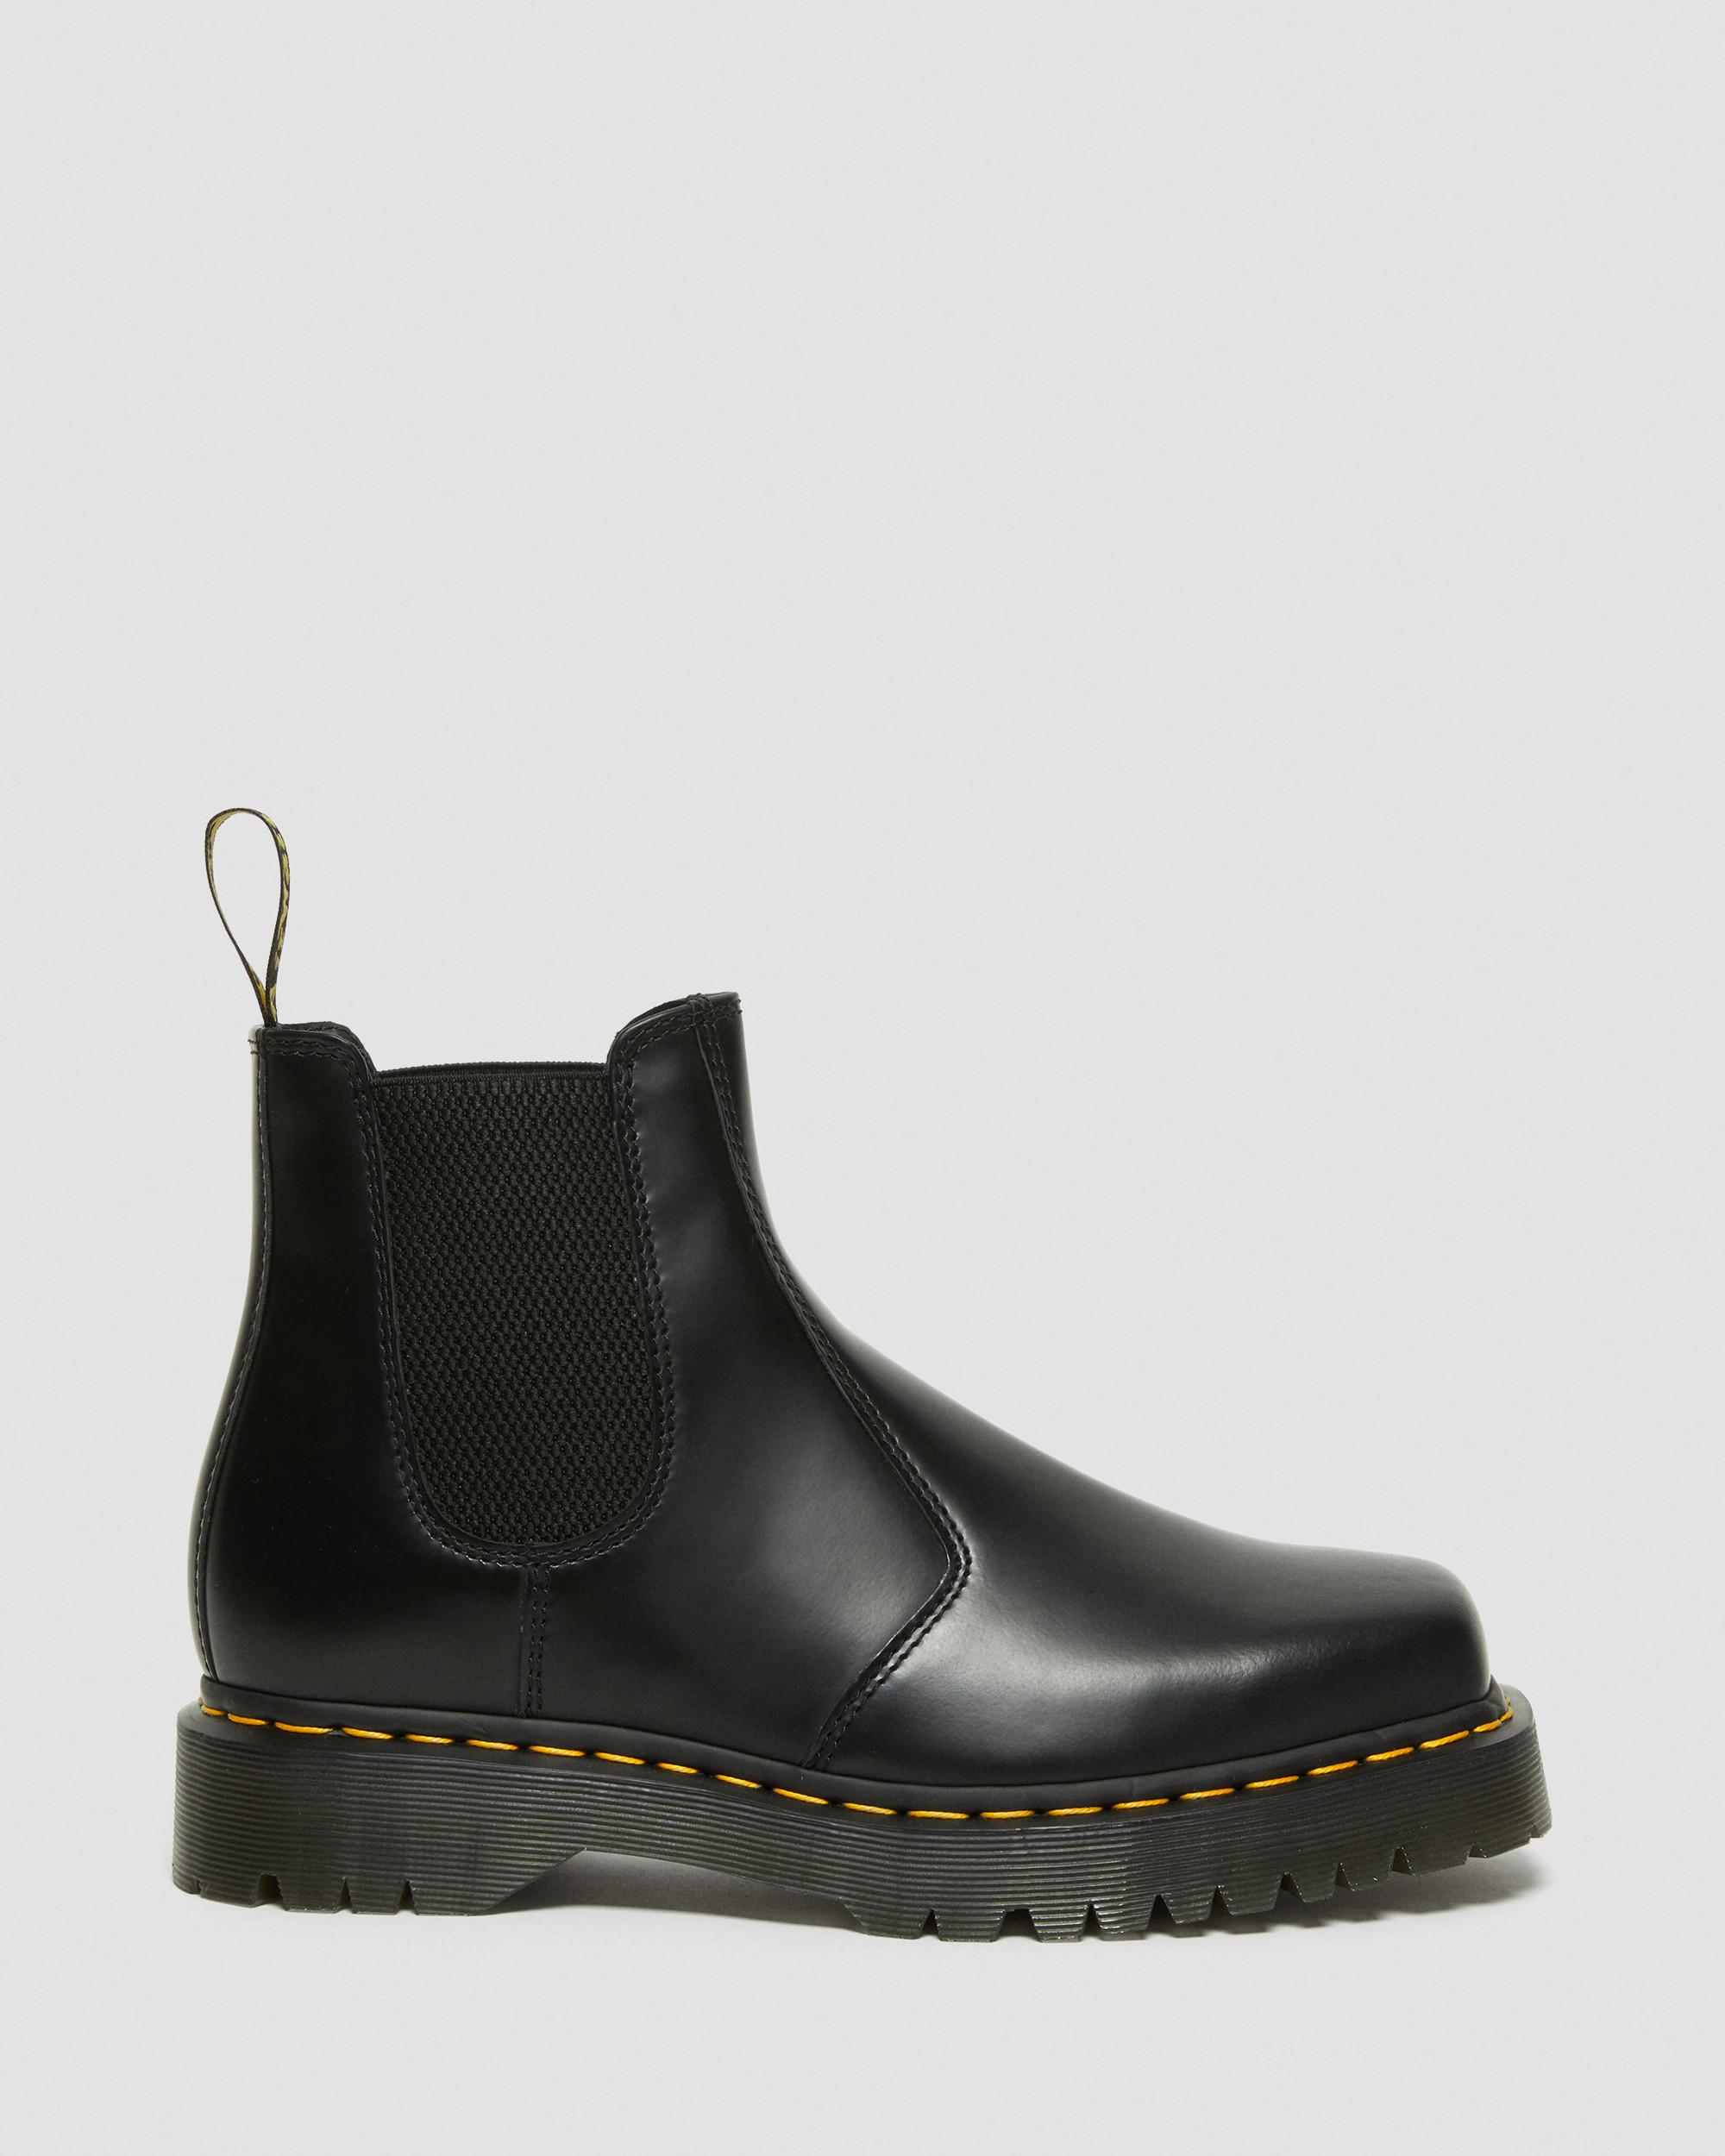 2976 Bex Squared Toe Leather Chelsea Boots2976 Bex Squared Toe Leather Chelsea Boots Dr. Martens